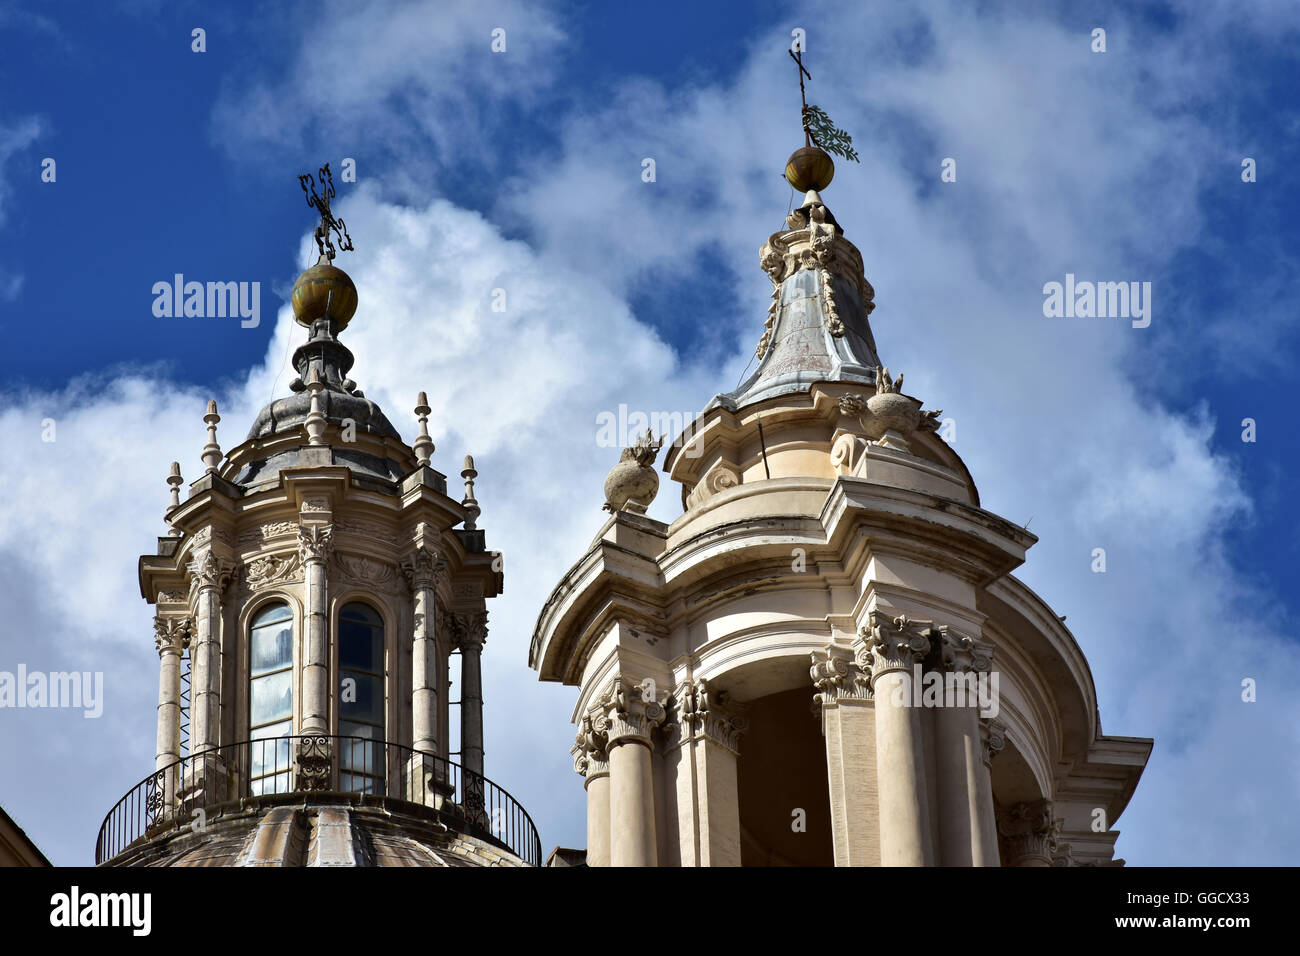 Spires and pinnacles of St Agnes baroque church in Rome, built in the 17th century Stock Photo